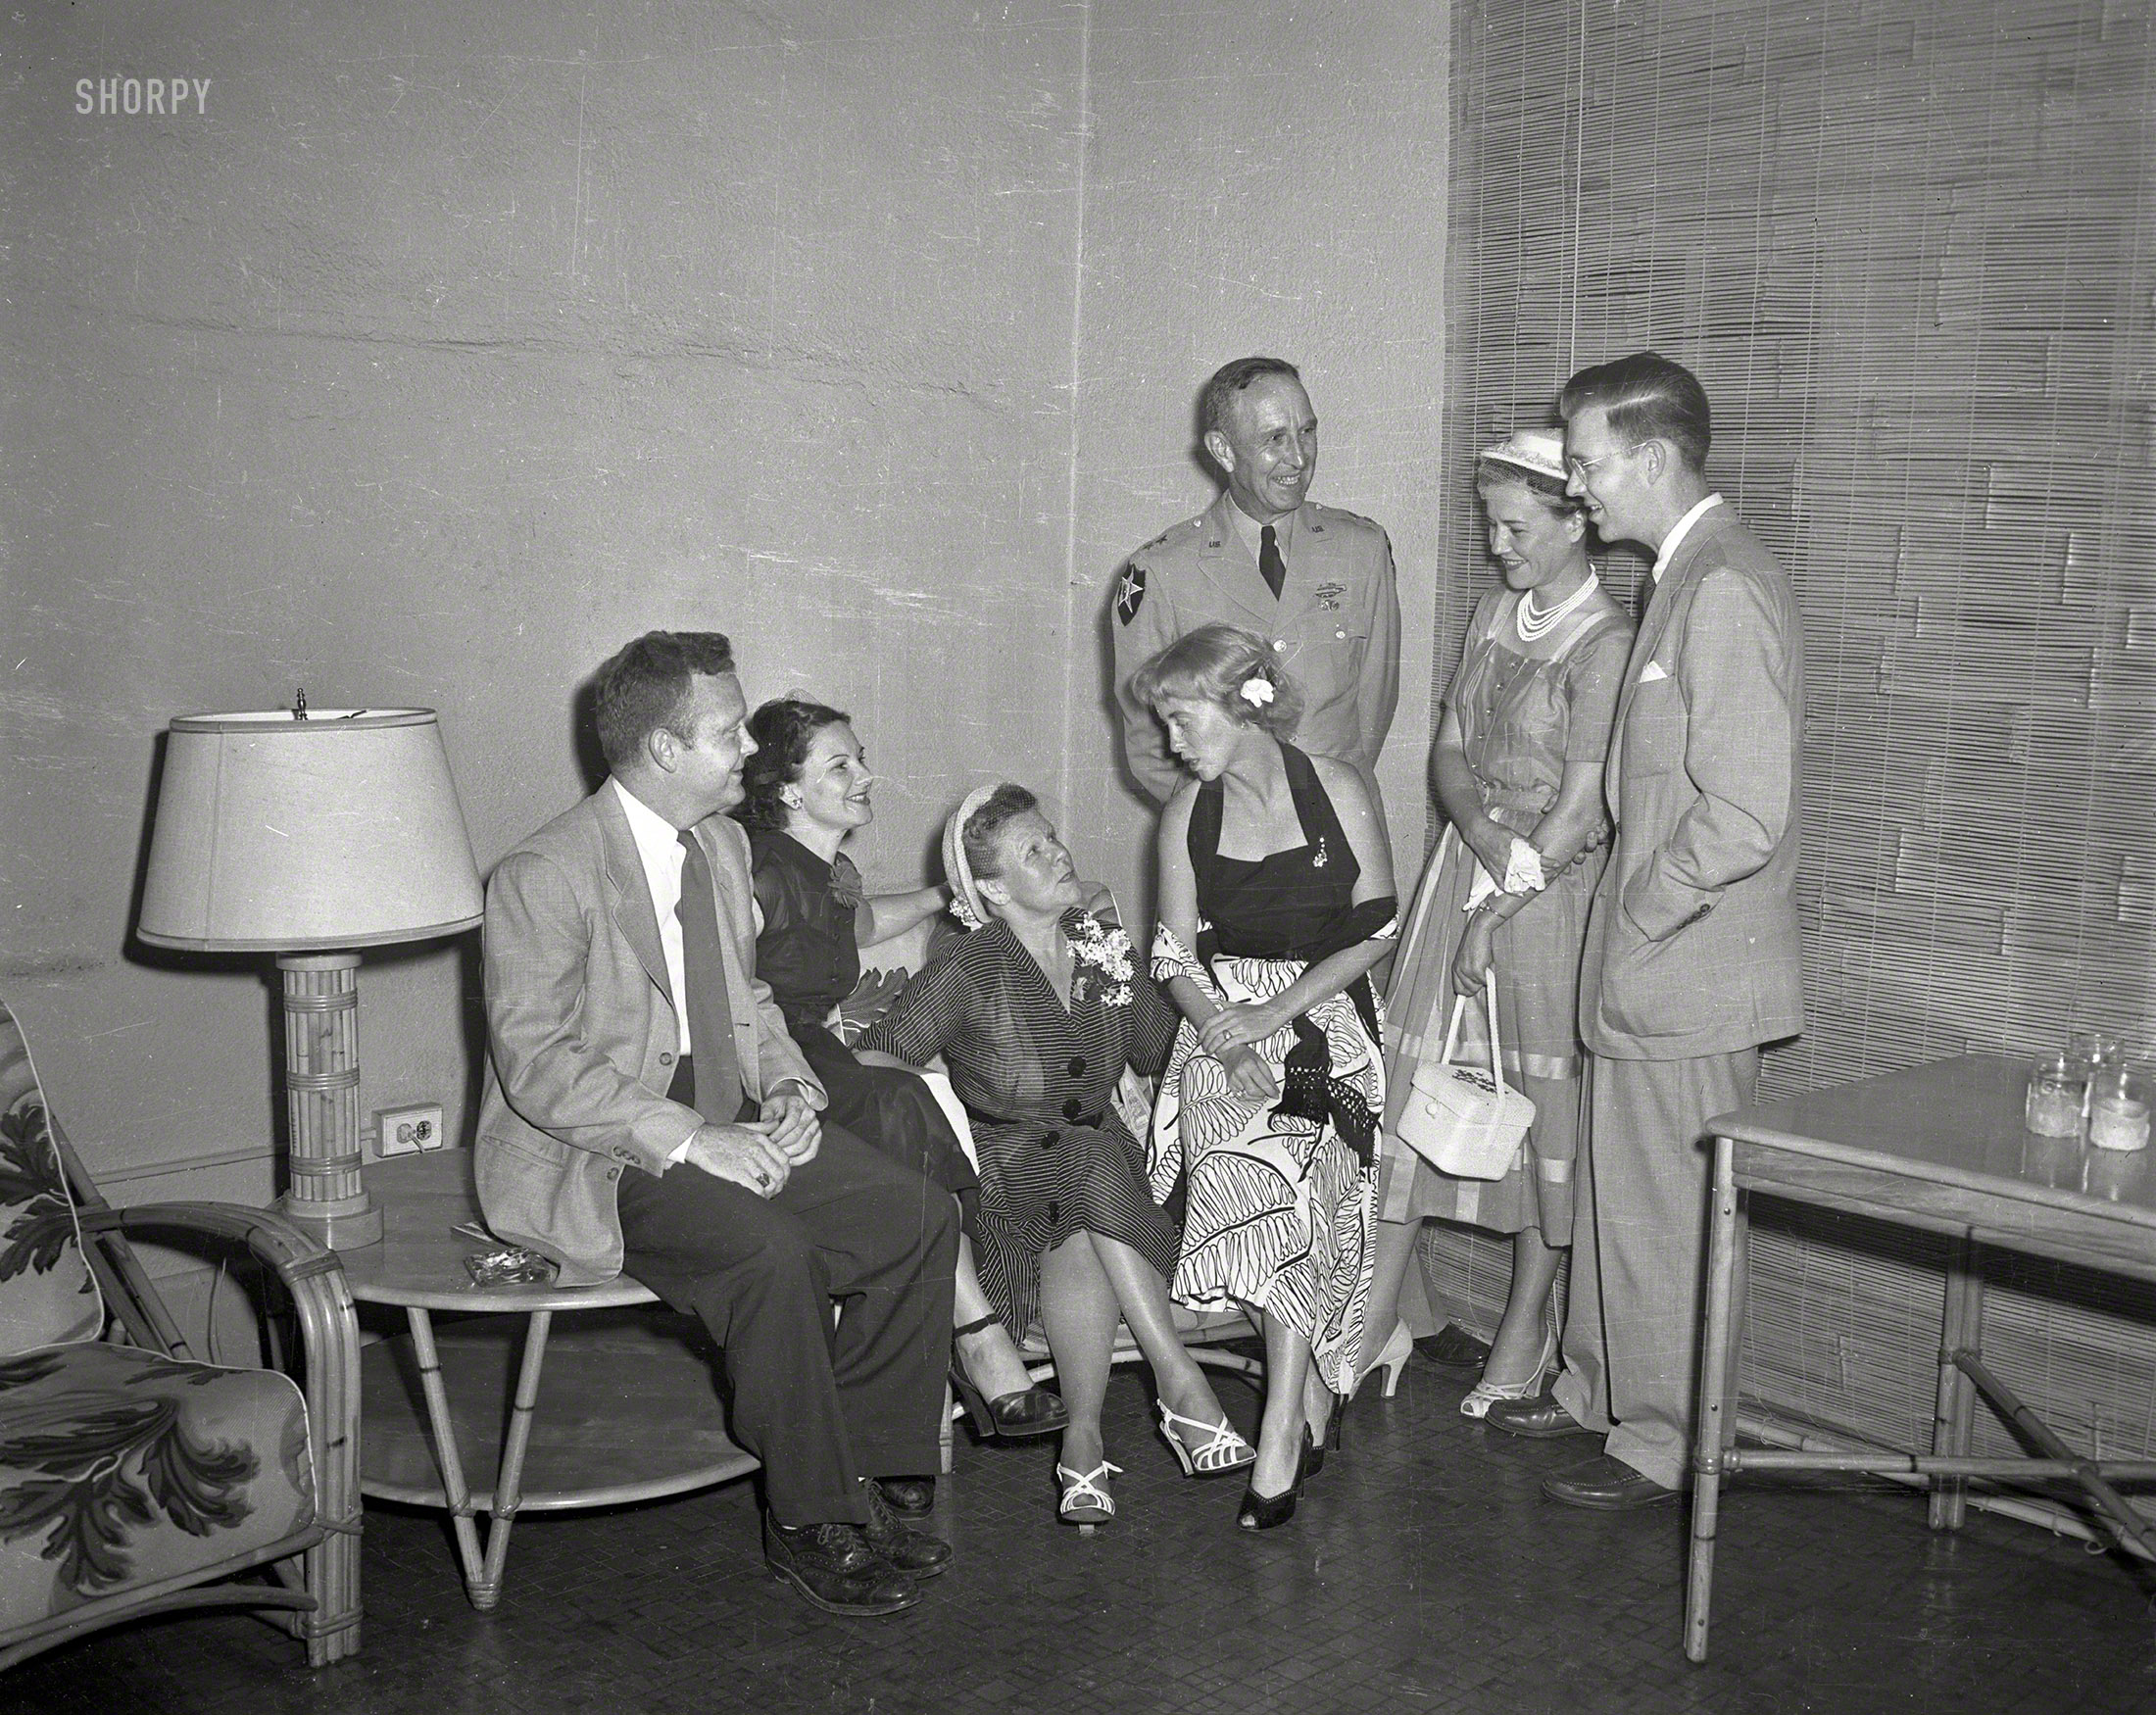 Columbus, Georgia, circa 1958. "Reception." Where civilian bamboo meets Army brass. 4x5 inch acetate negative from the News Photo Archive. View full size.